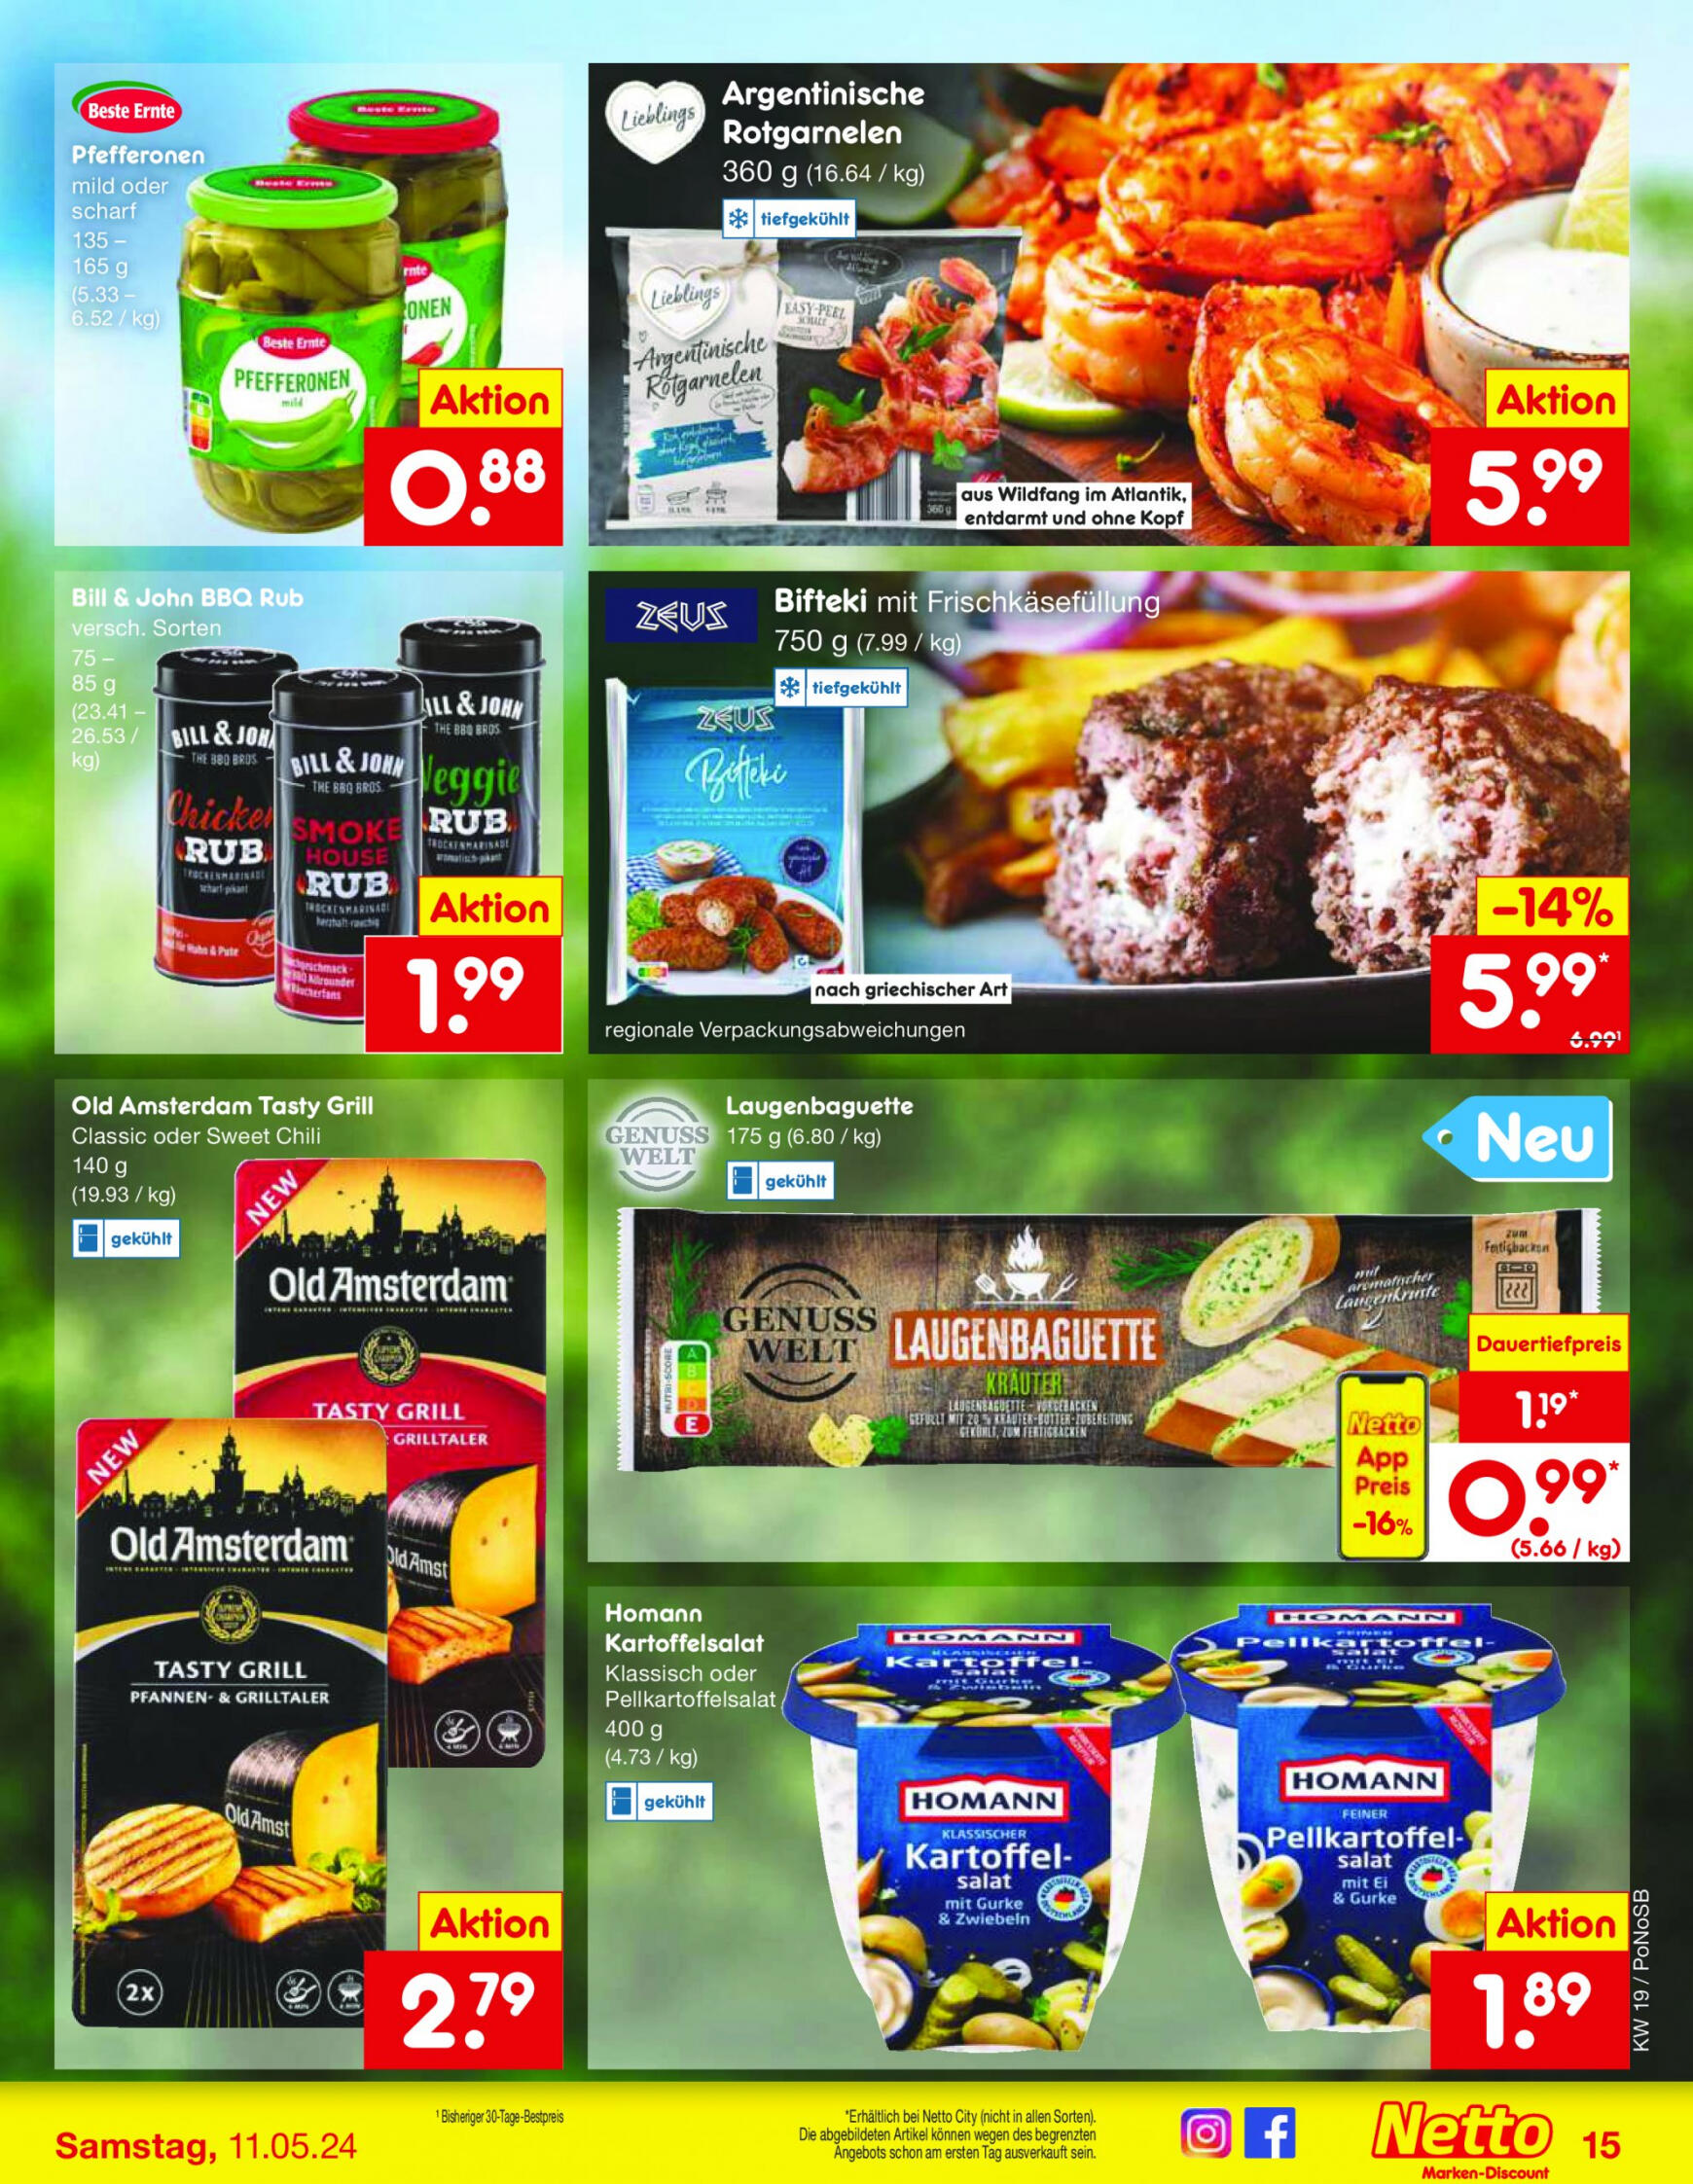 netto - Flyer Netto aktuell 06.05. - 11.05. - page: 15